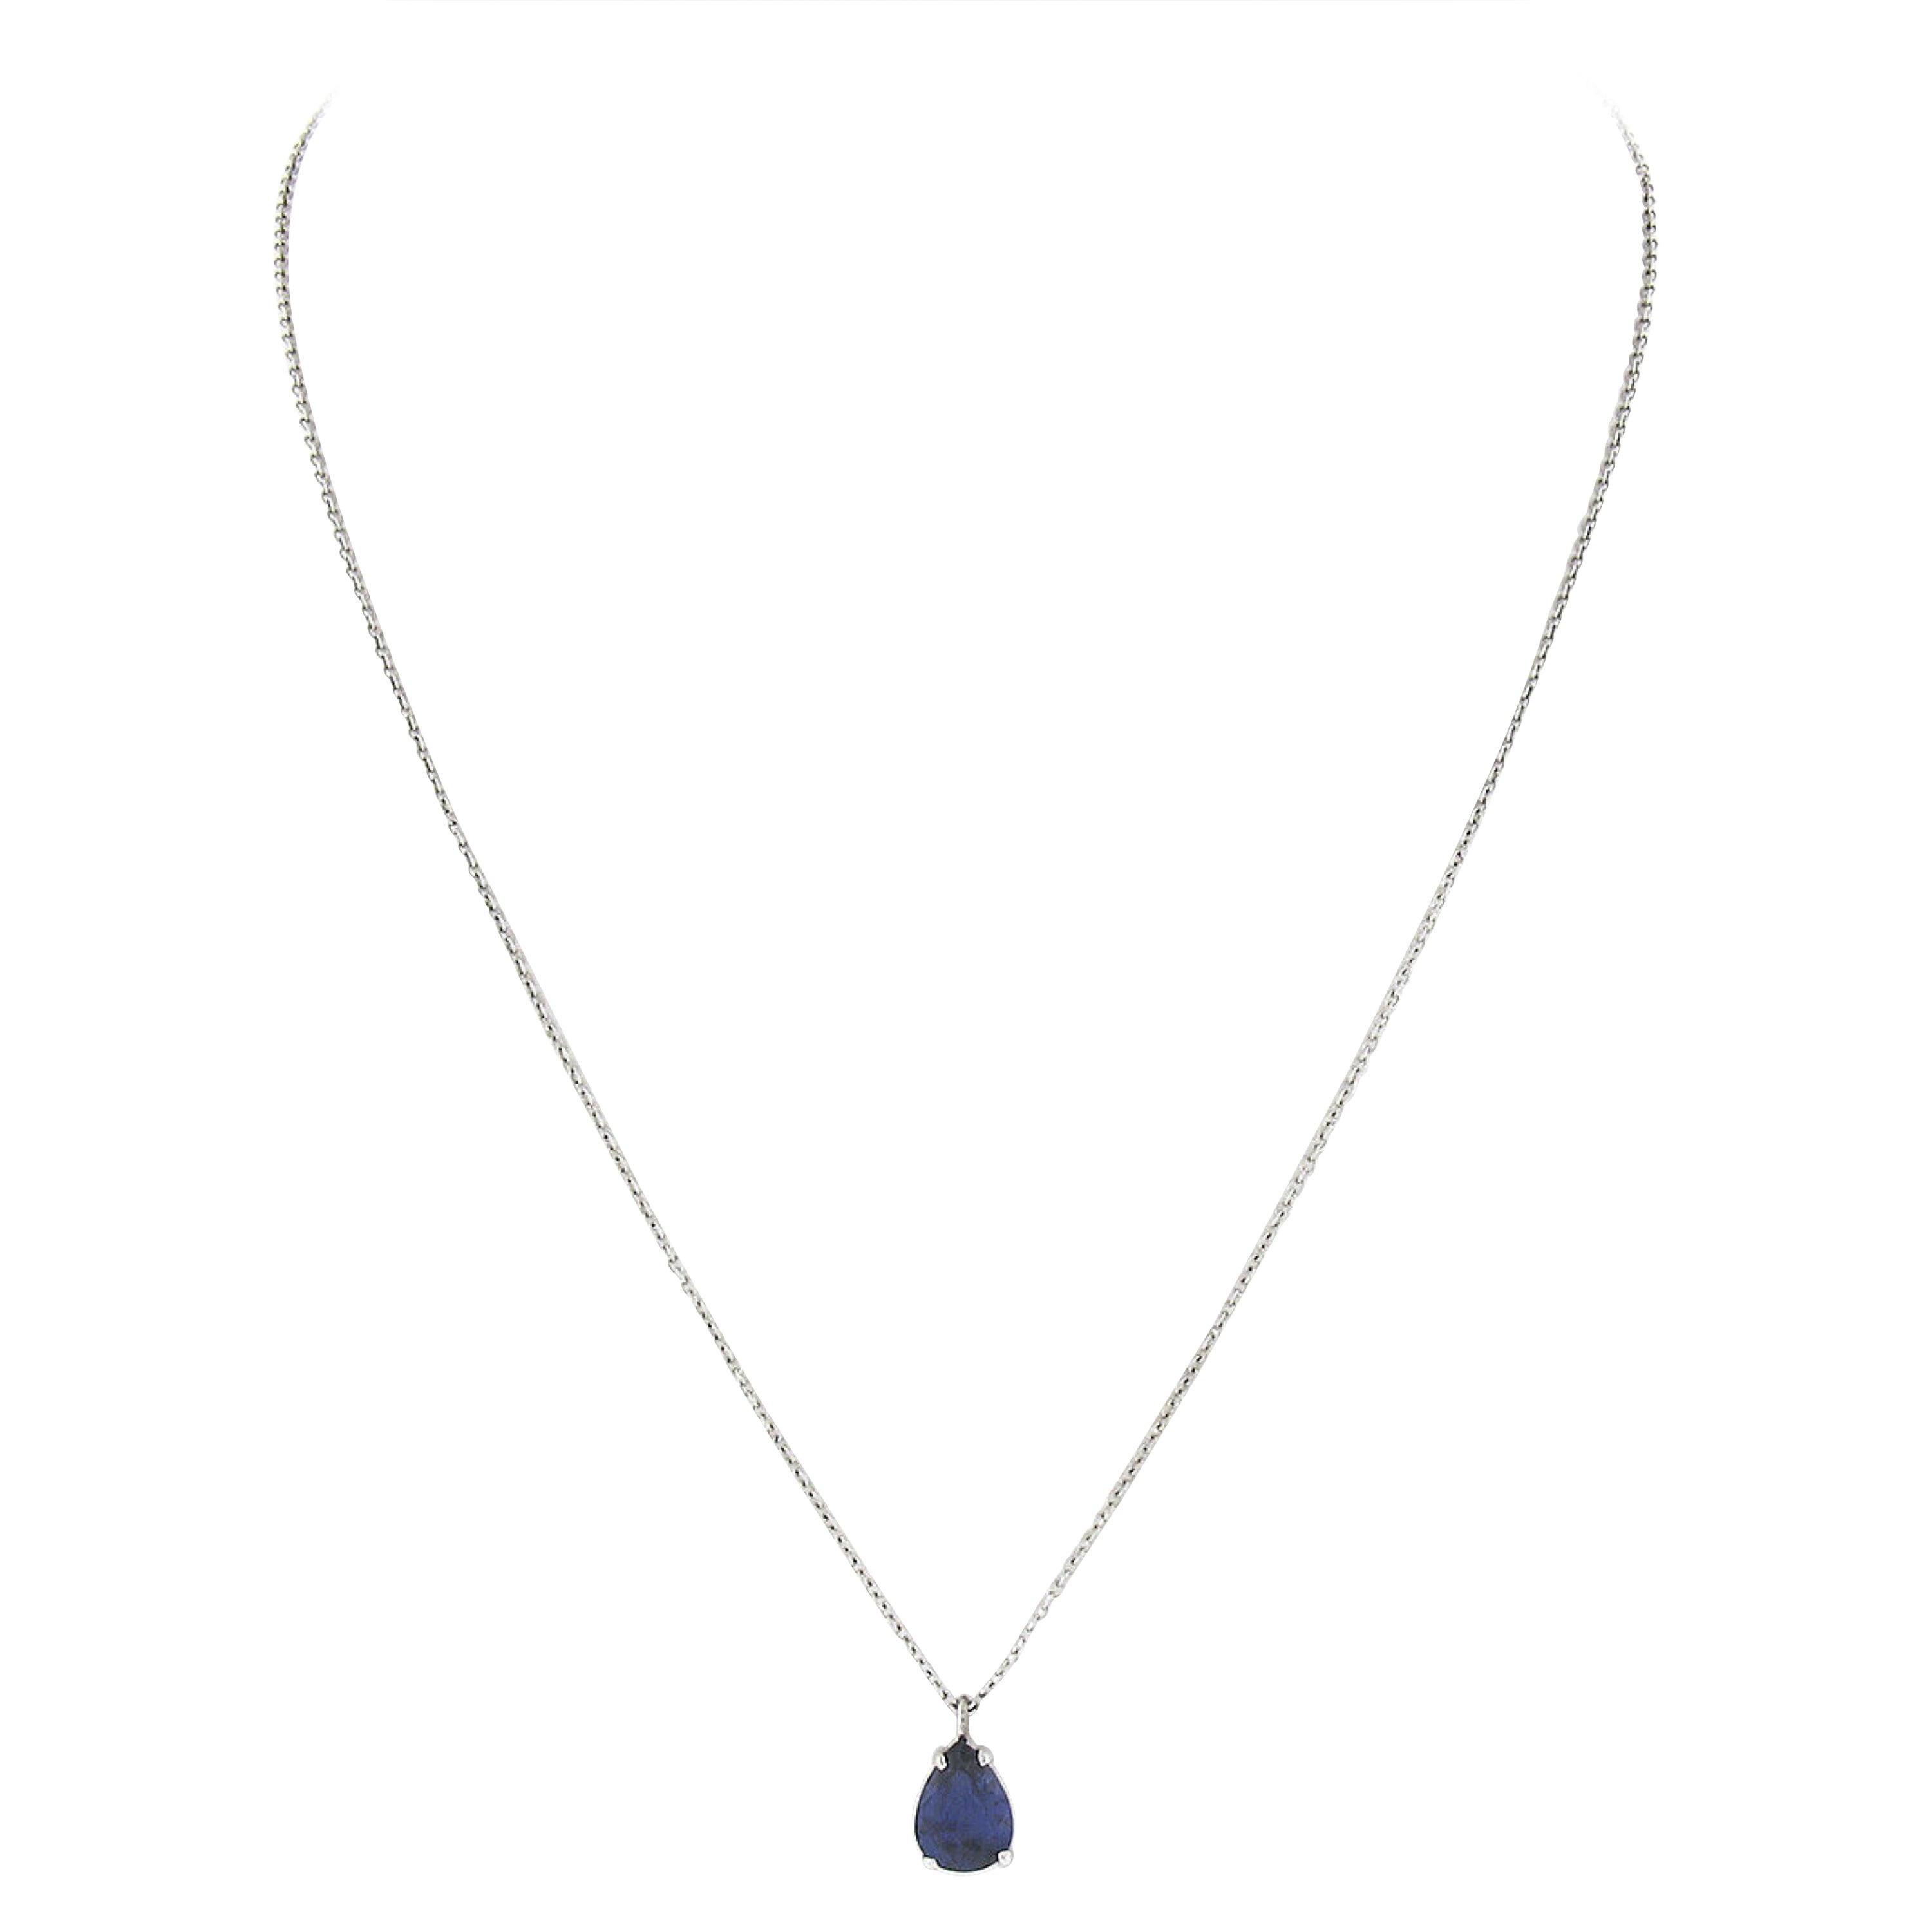 NEW 14k White Gold 1.15ctw GIA Pear Sapphire Solitaire Tear Drop Pendant & Chain